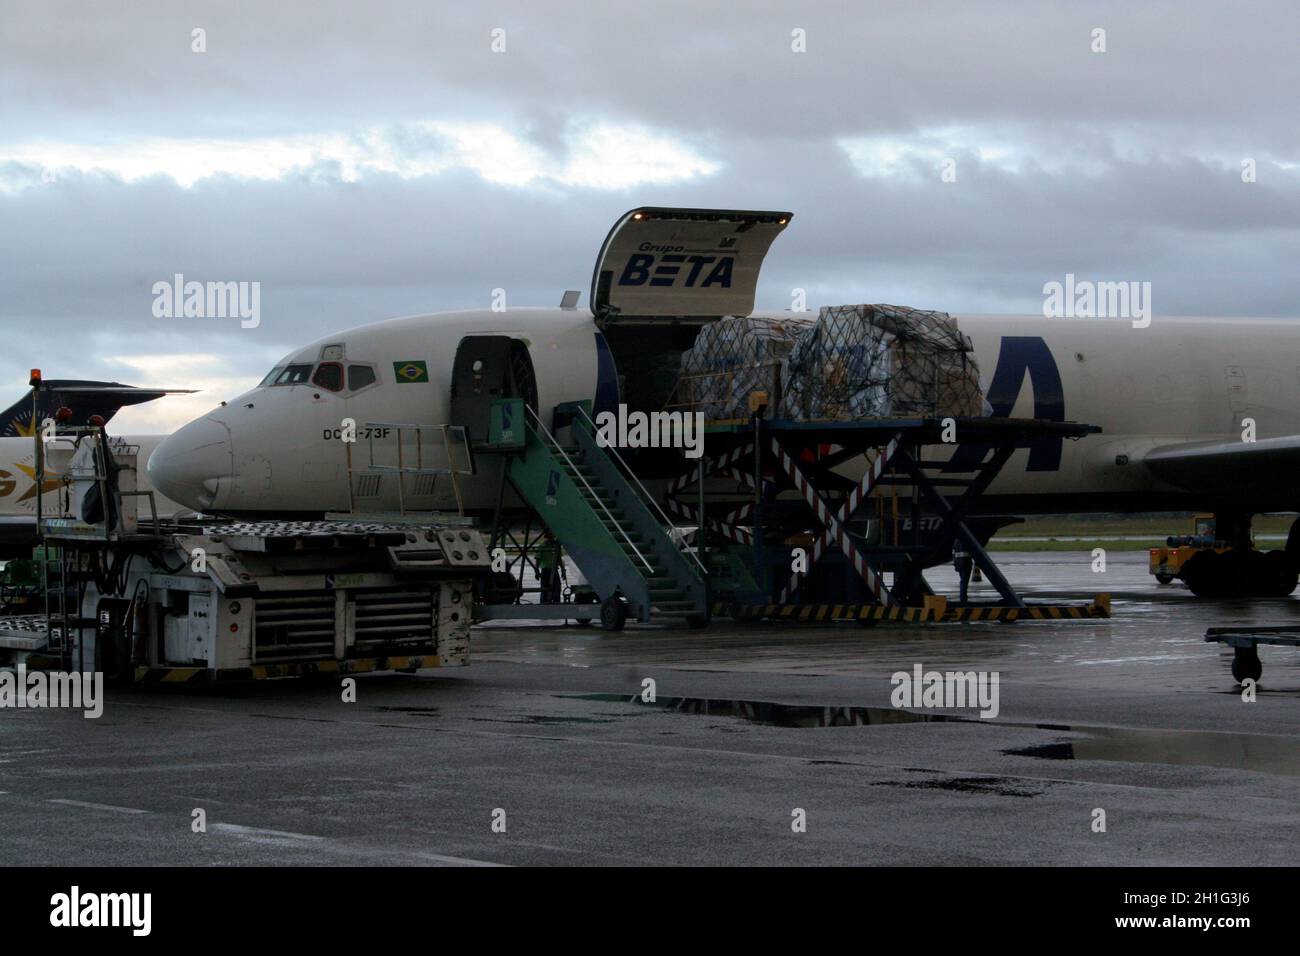 salvador, bahia / brazil - may 15, 2007: Douglas DC-8 freighter aircraft from the airline Beta seen in loading procedure at Salvador airport. Stock Photo